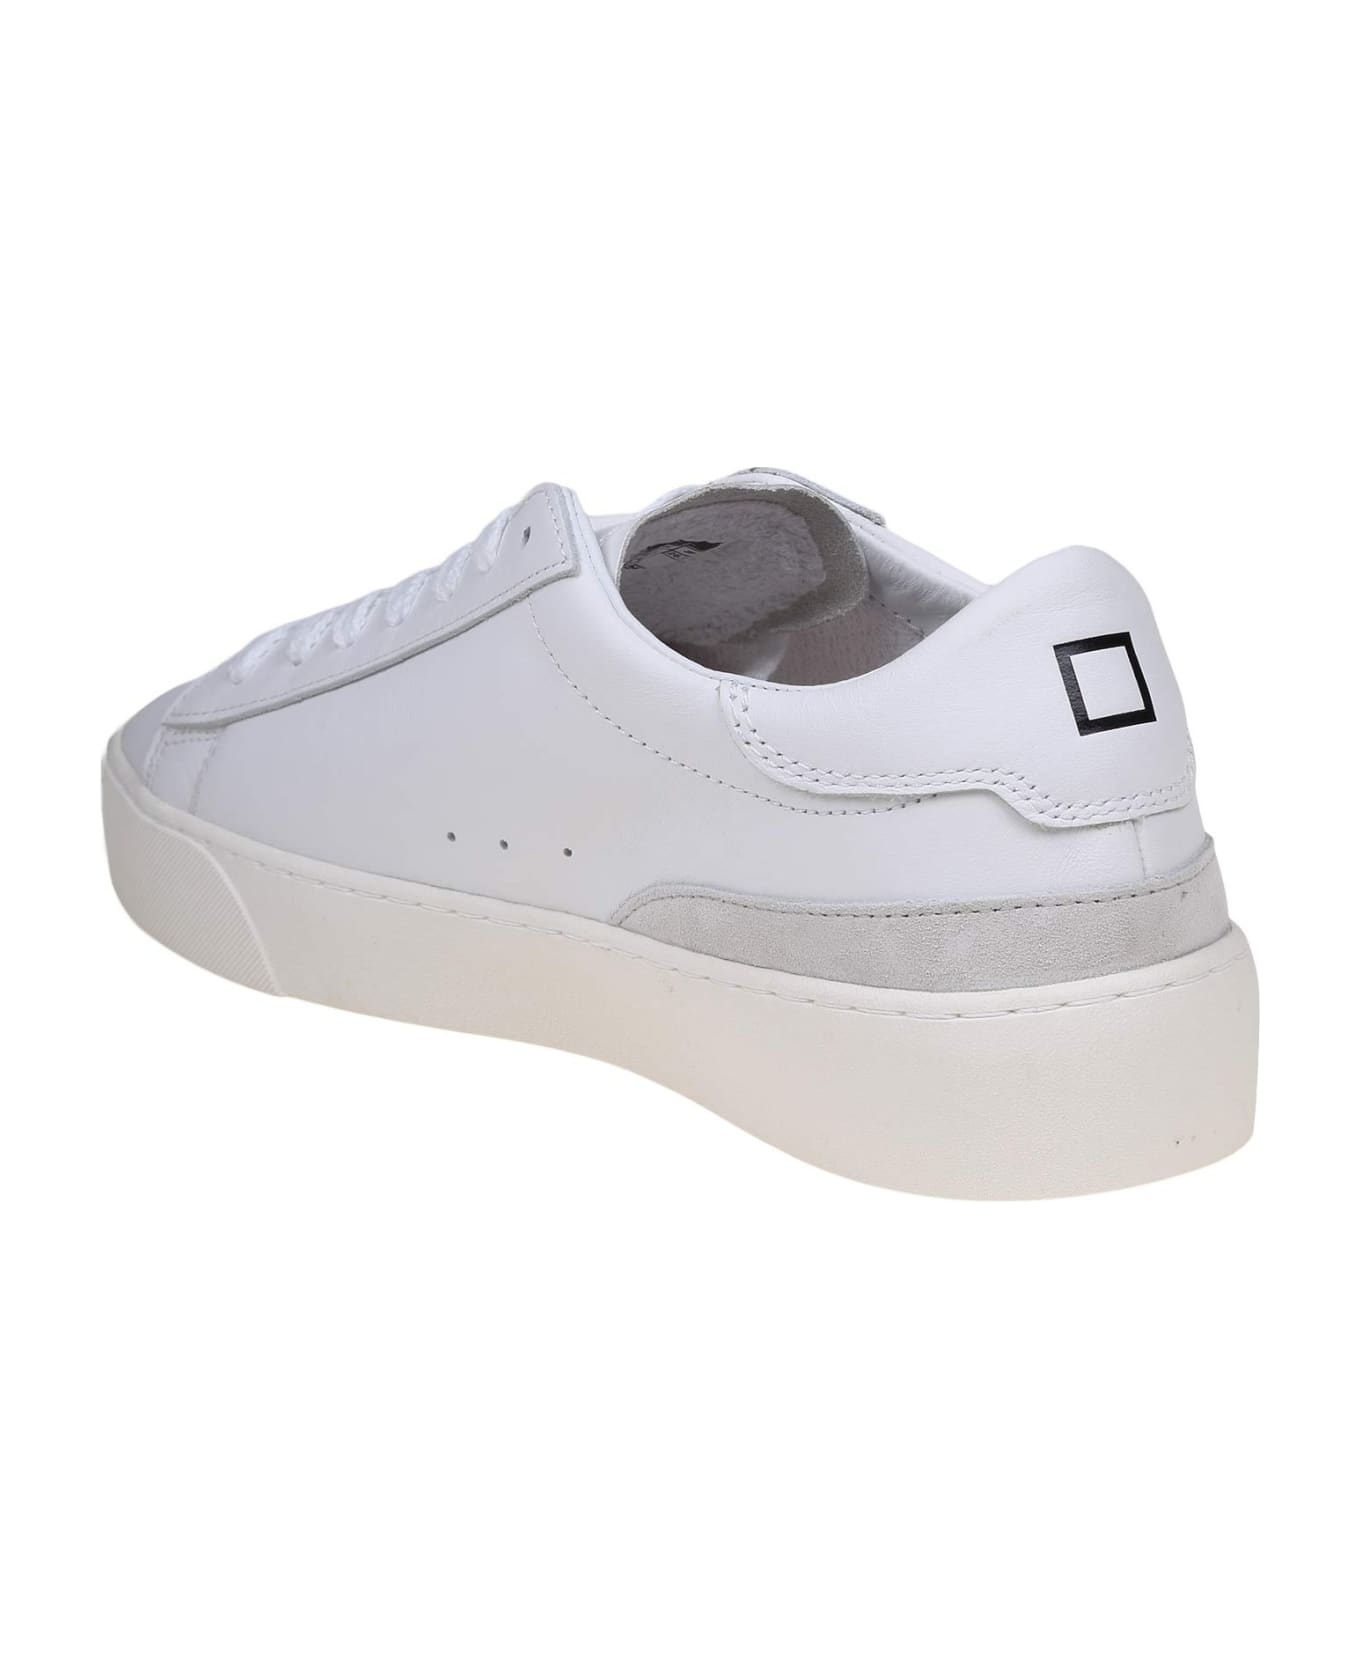 D.A.T.E. Sonica Sneakers In White Leather And Suede - White スニーカー